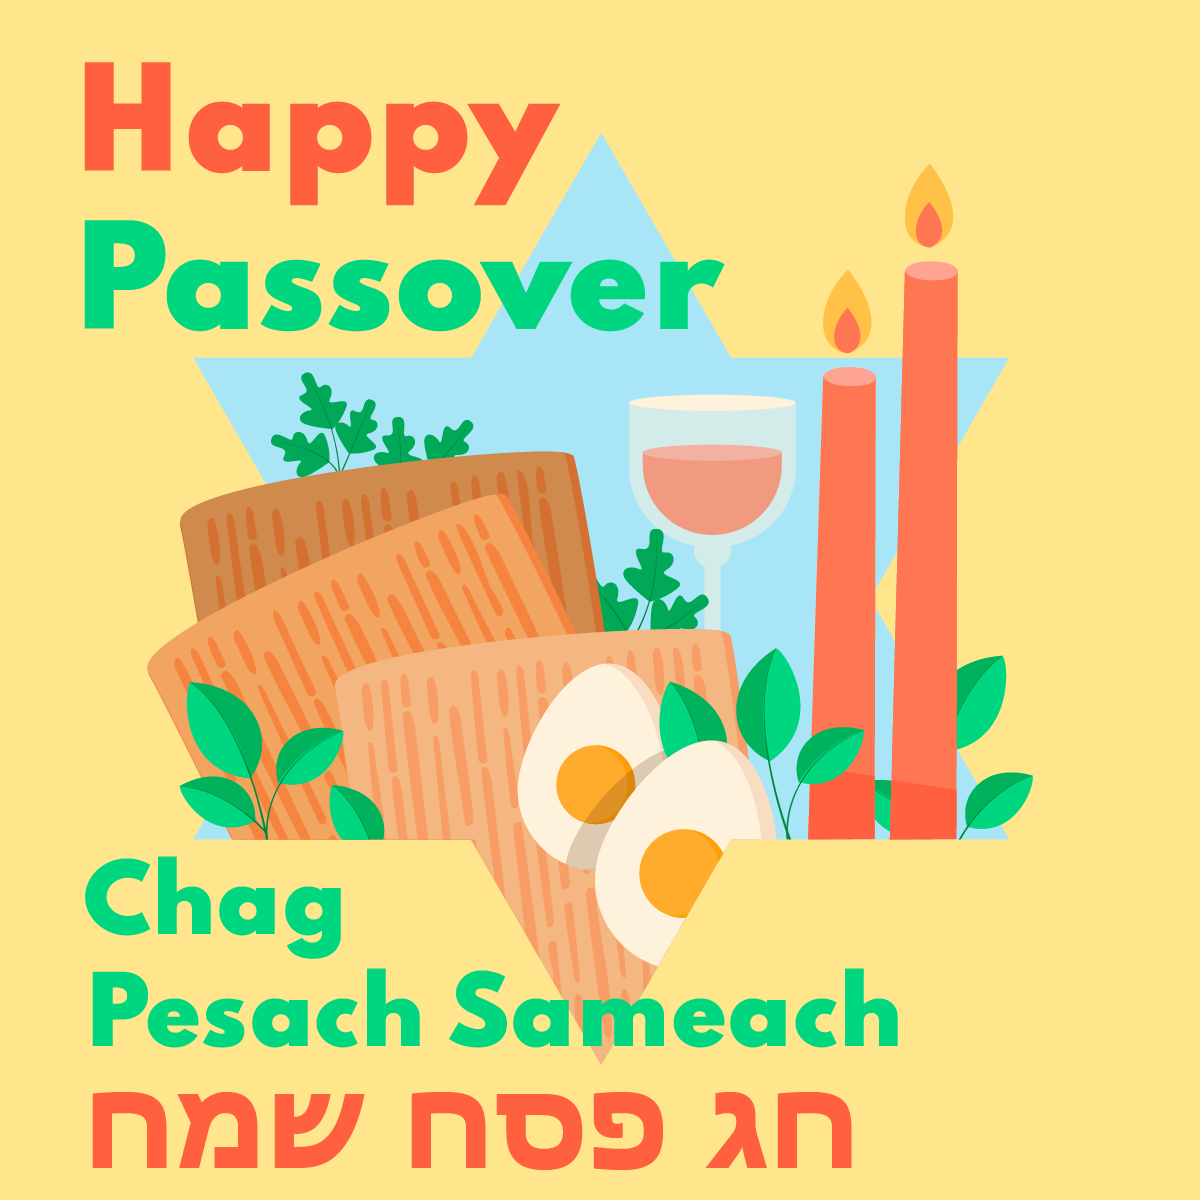 Passover begins this evening and continues until the evening of April 23rd.